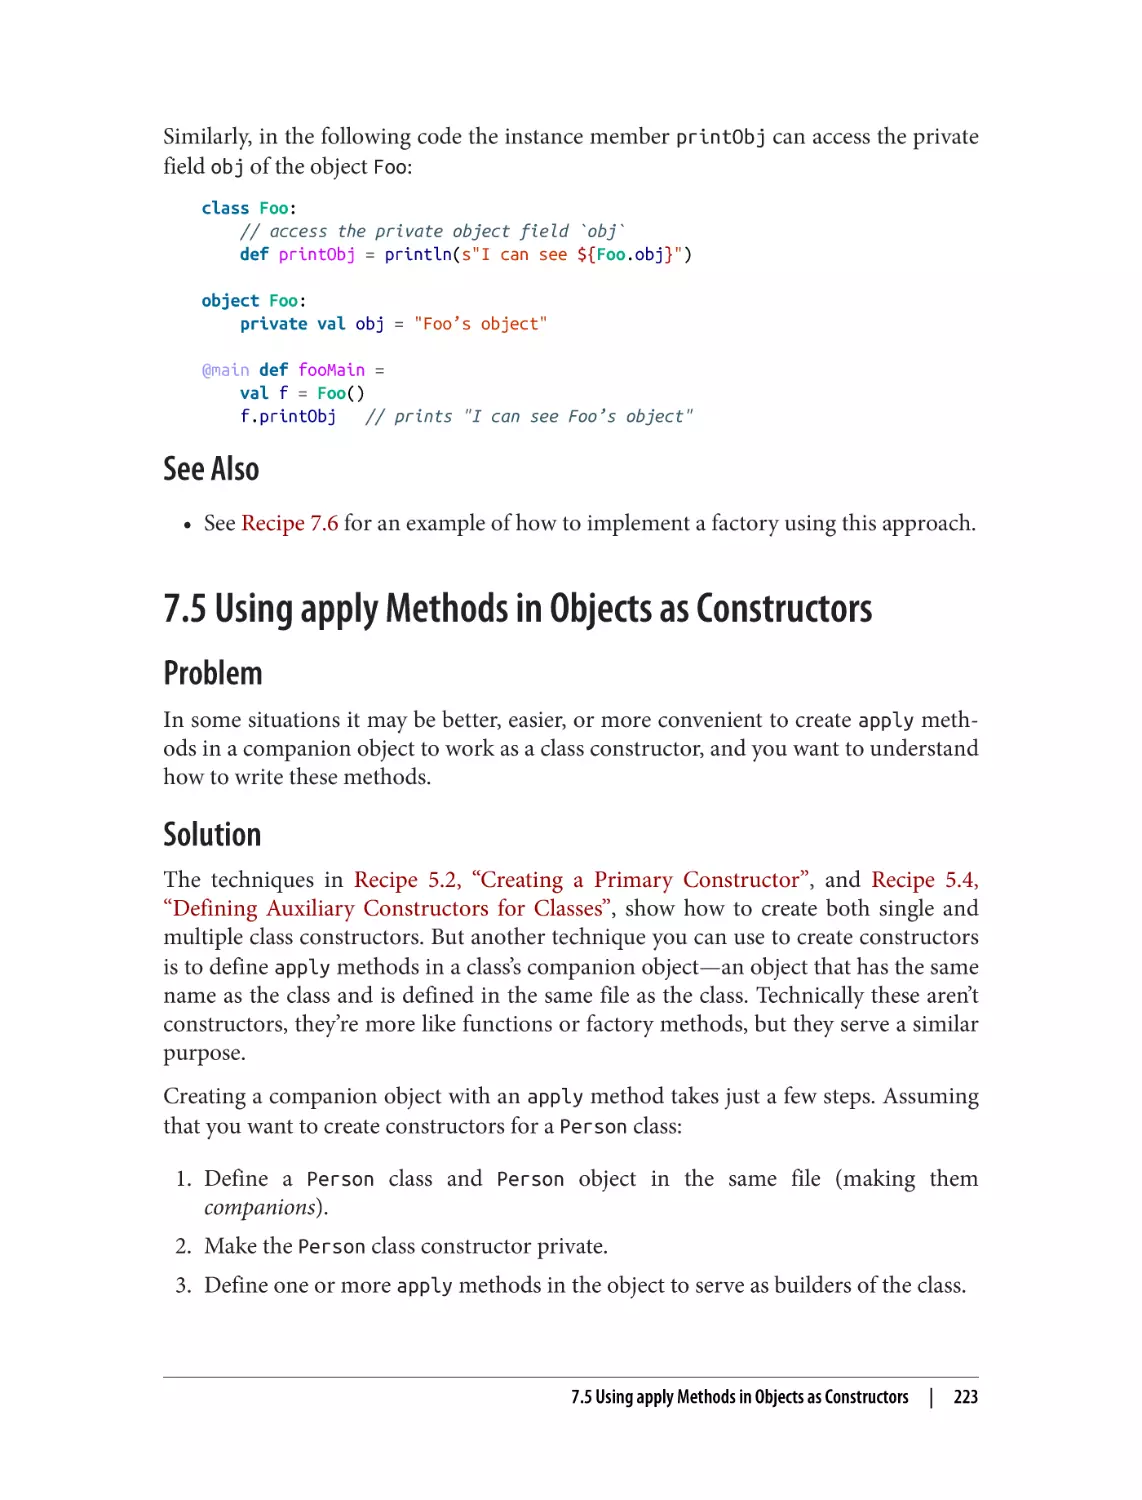 See Also
7.5 Using apply Methods in Objects as Constructors
Problem
Solution